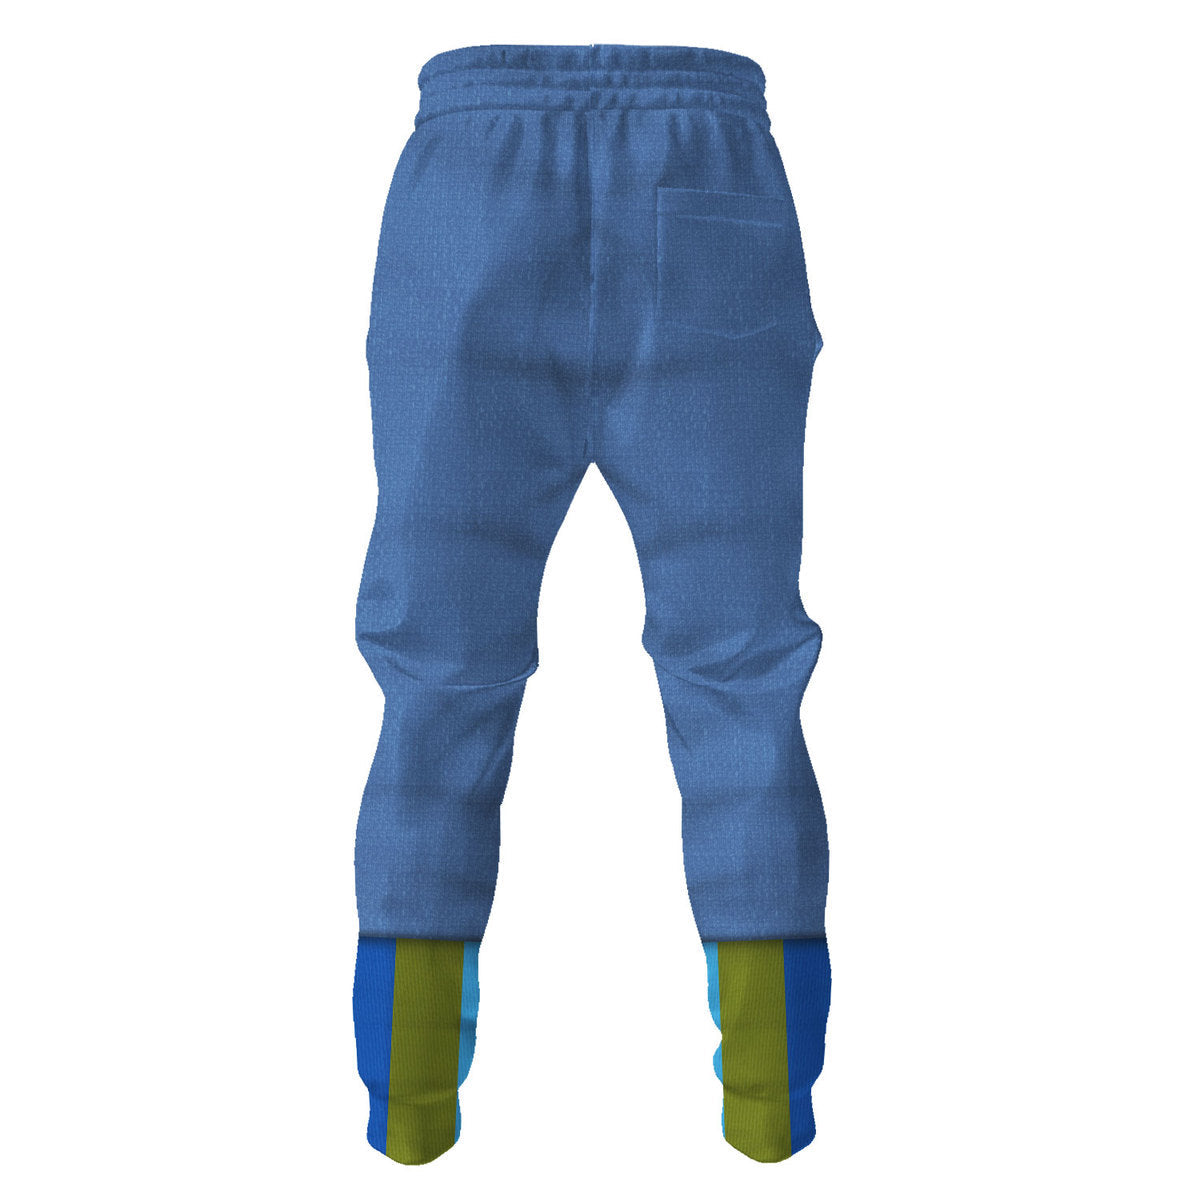 Chucky Costume Pants Child's Play Character Chucky Costume Jogger Colorful Unisex Adults